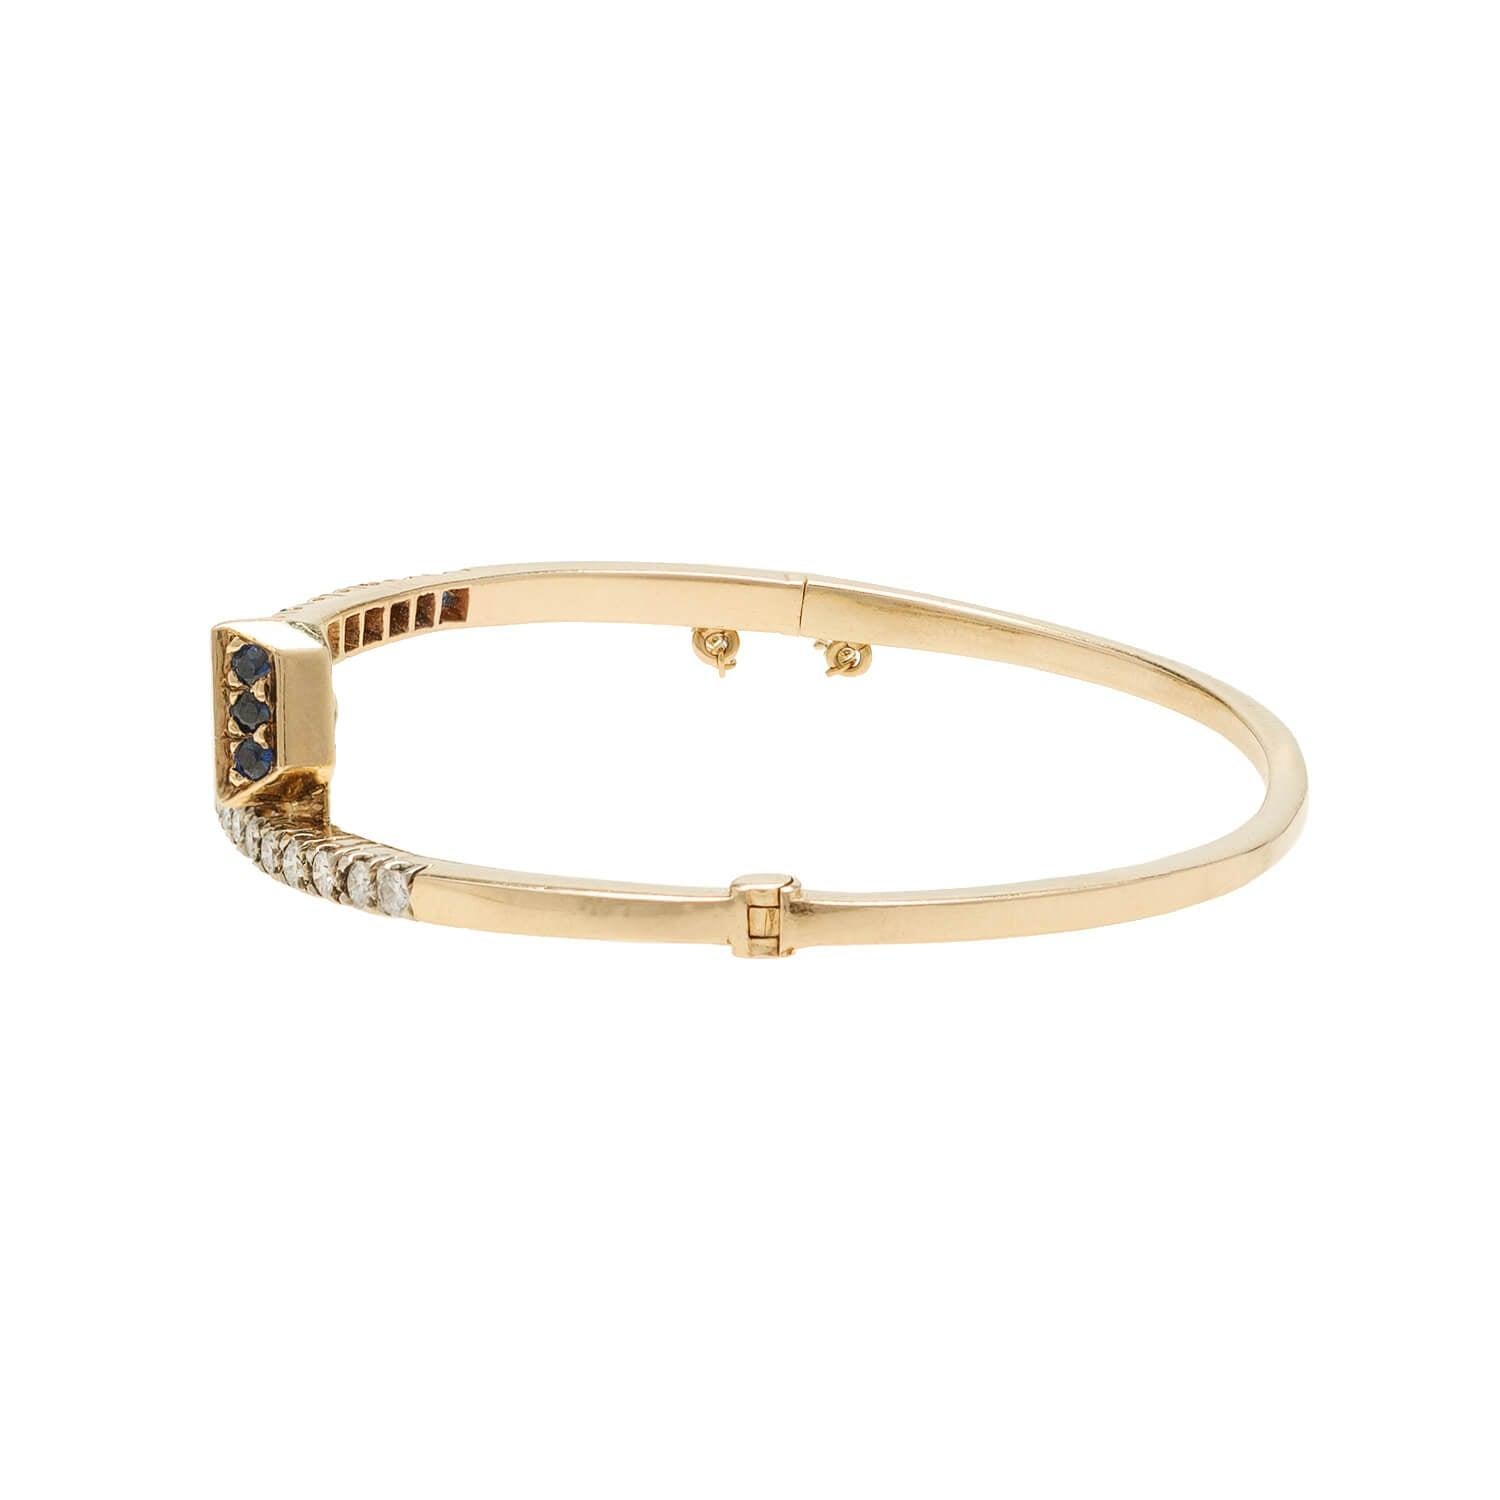 A fabulous nail bracelet from the Art Deco (ca1930) era! Gucci has replicated the square head nail design since the 1960s with its origins in the equestrian world, which is modeled after the nails used to hold the horse's shoe in place. This bangle